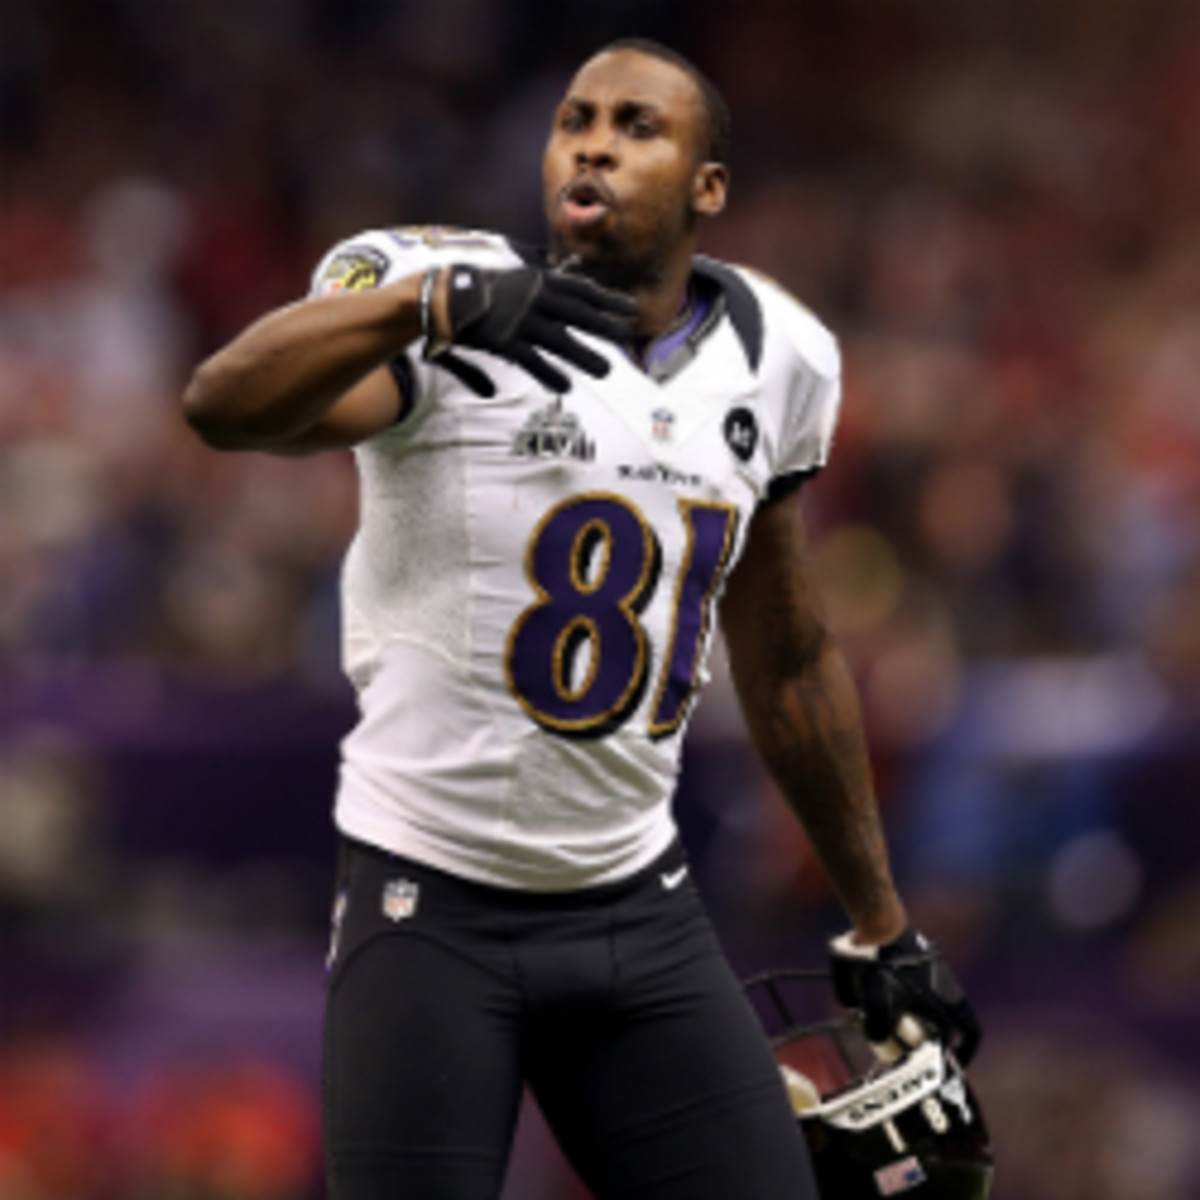 Ravens wideout Anquan Boldin was traded to the 49ers for a sixth-round pick. (Christian Petersen/Getty Images)